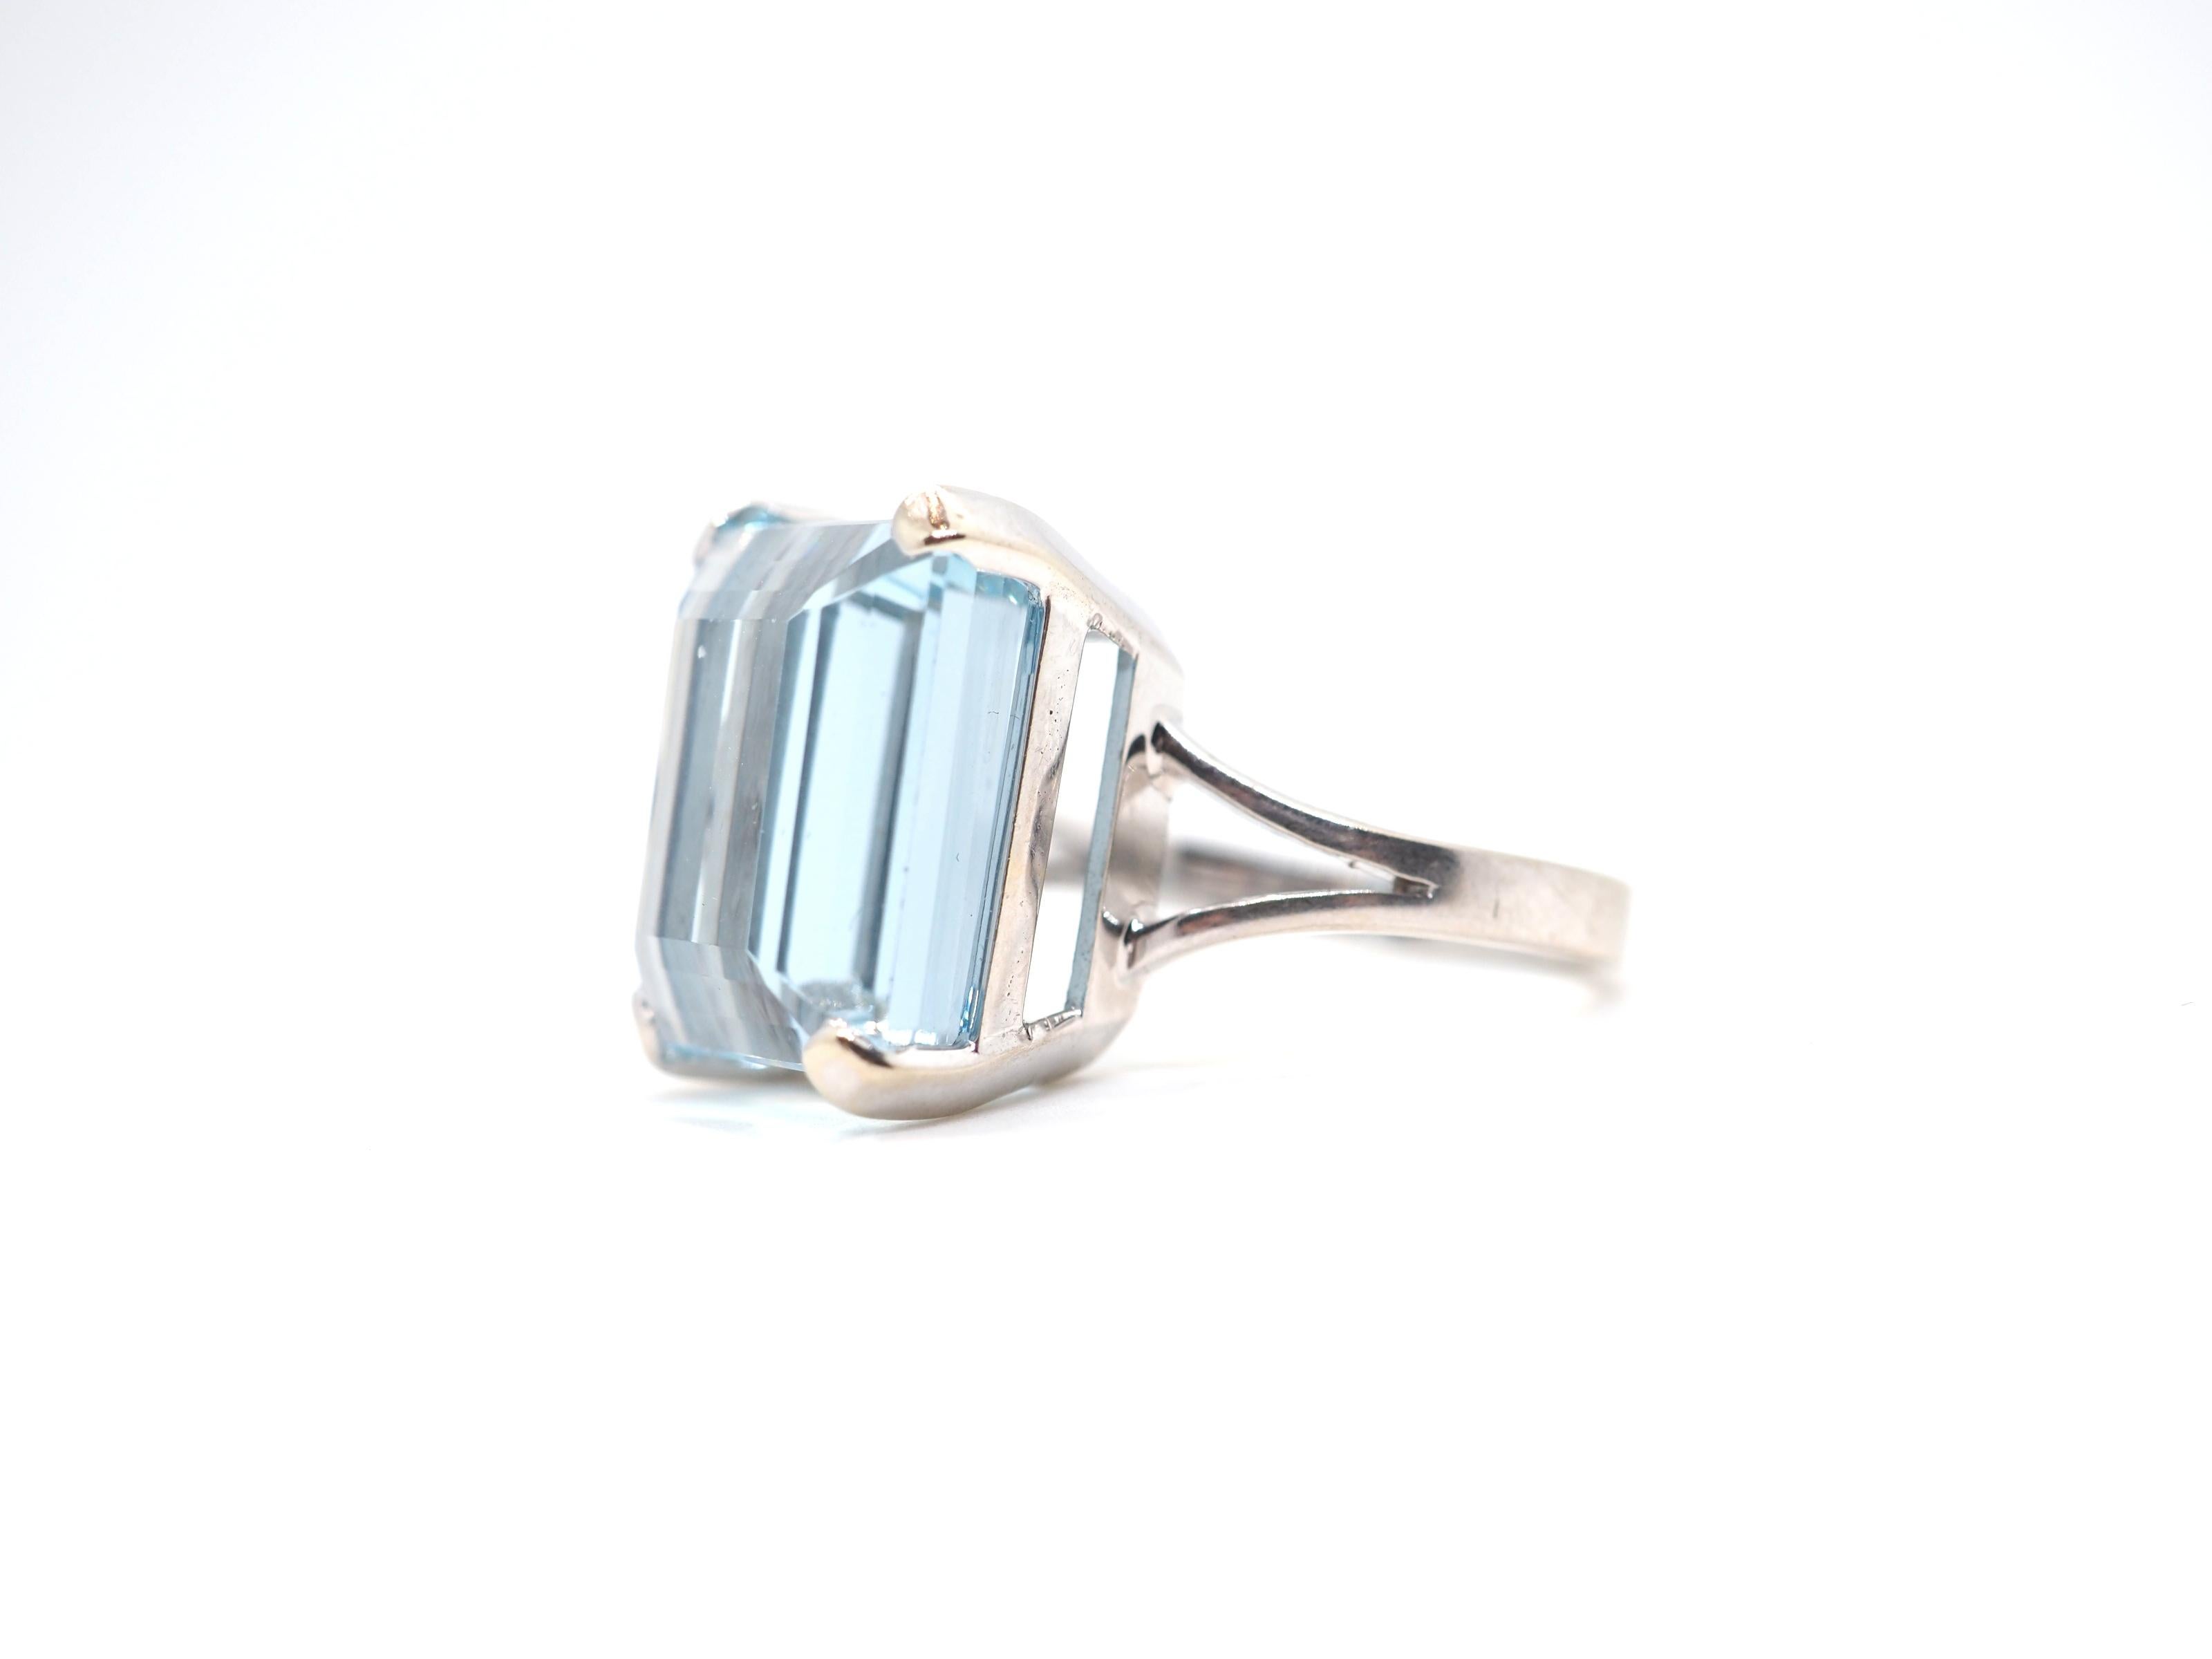 Precious cocktail Ring made of 18k white gold, decorated with amazing aquamarine emerald cut of 1.7cm long x 1.2cm wide

Total Weight 9.1g 
Eu size: 55

The ring comes with a presentation box and our certificate 

All our pieces have been carefully